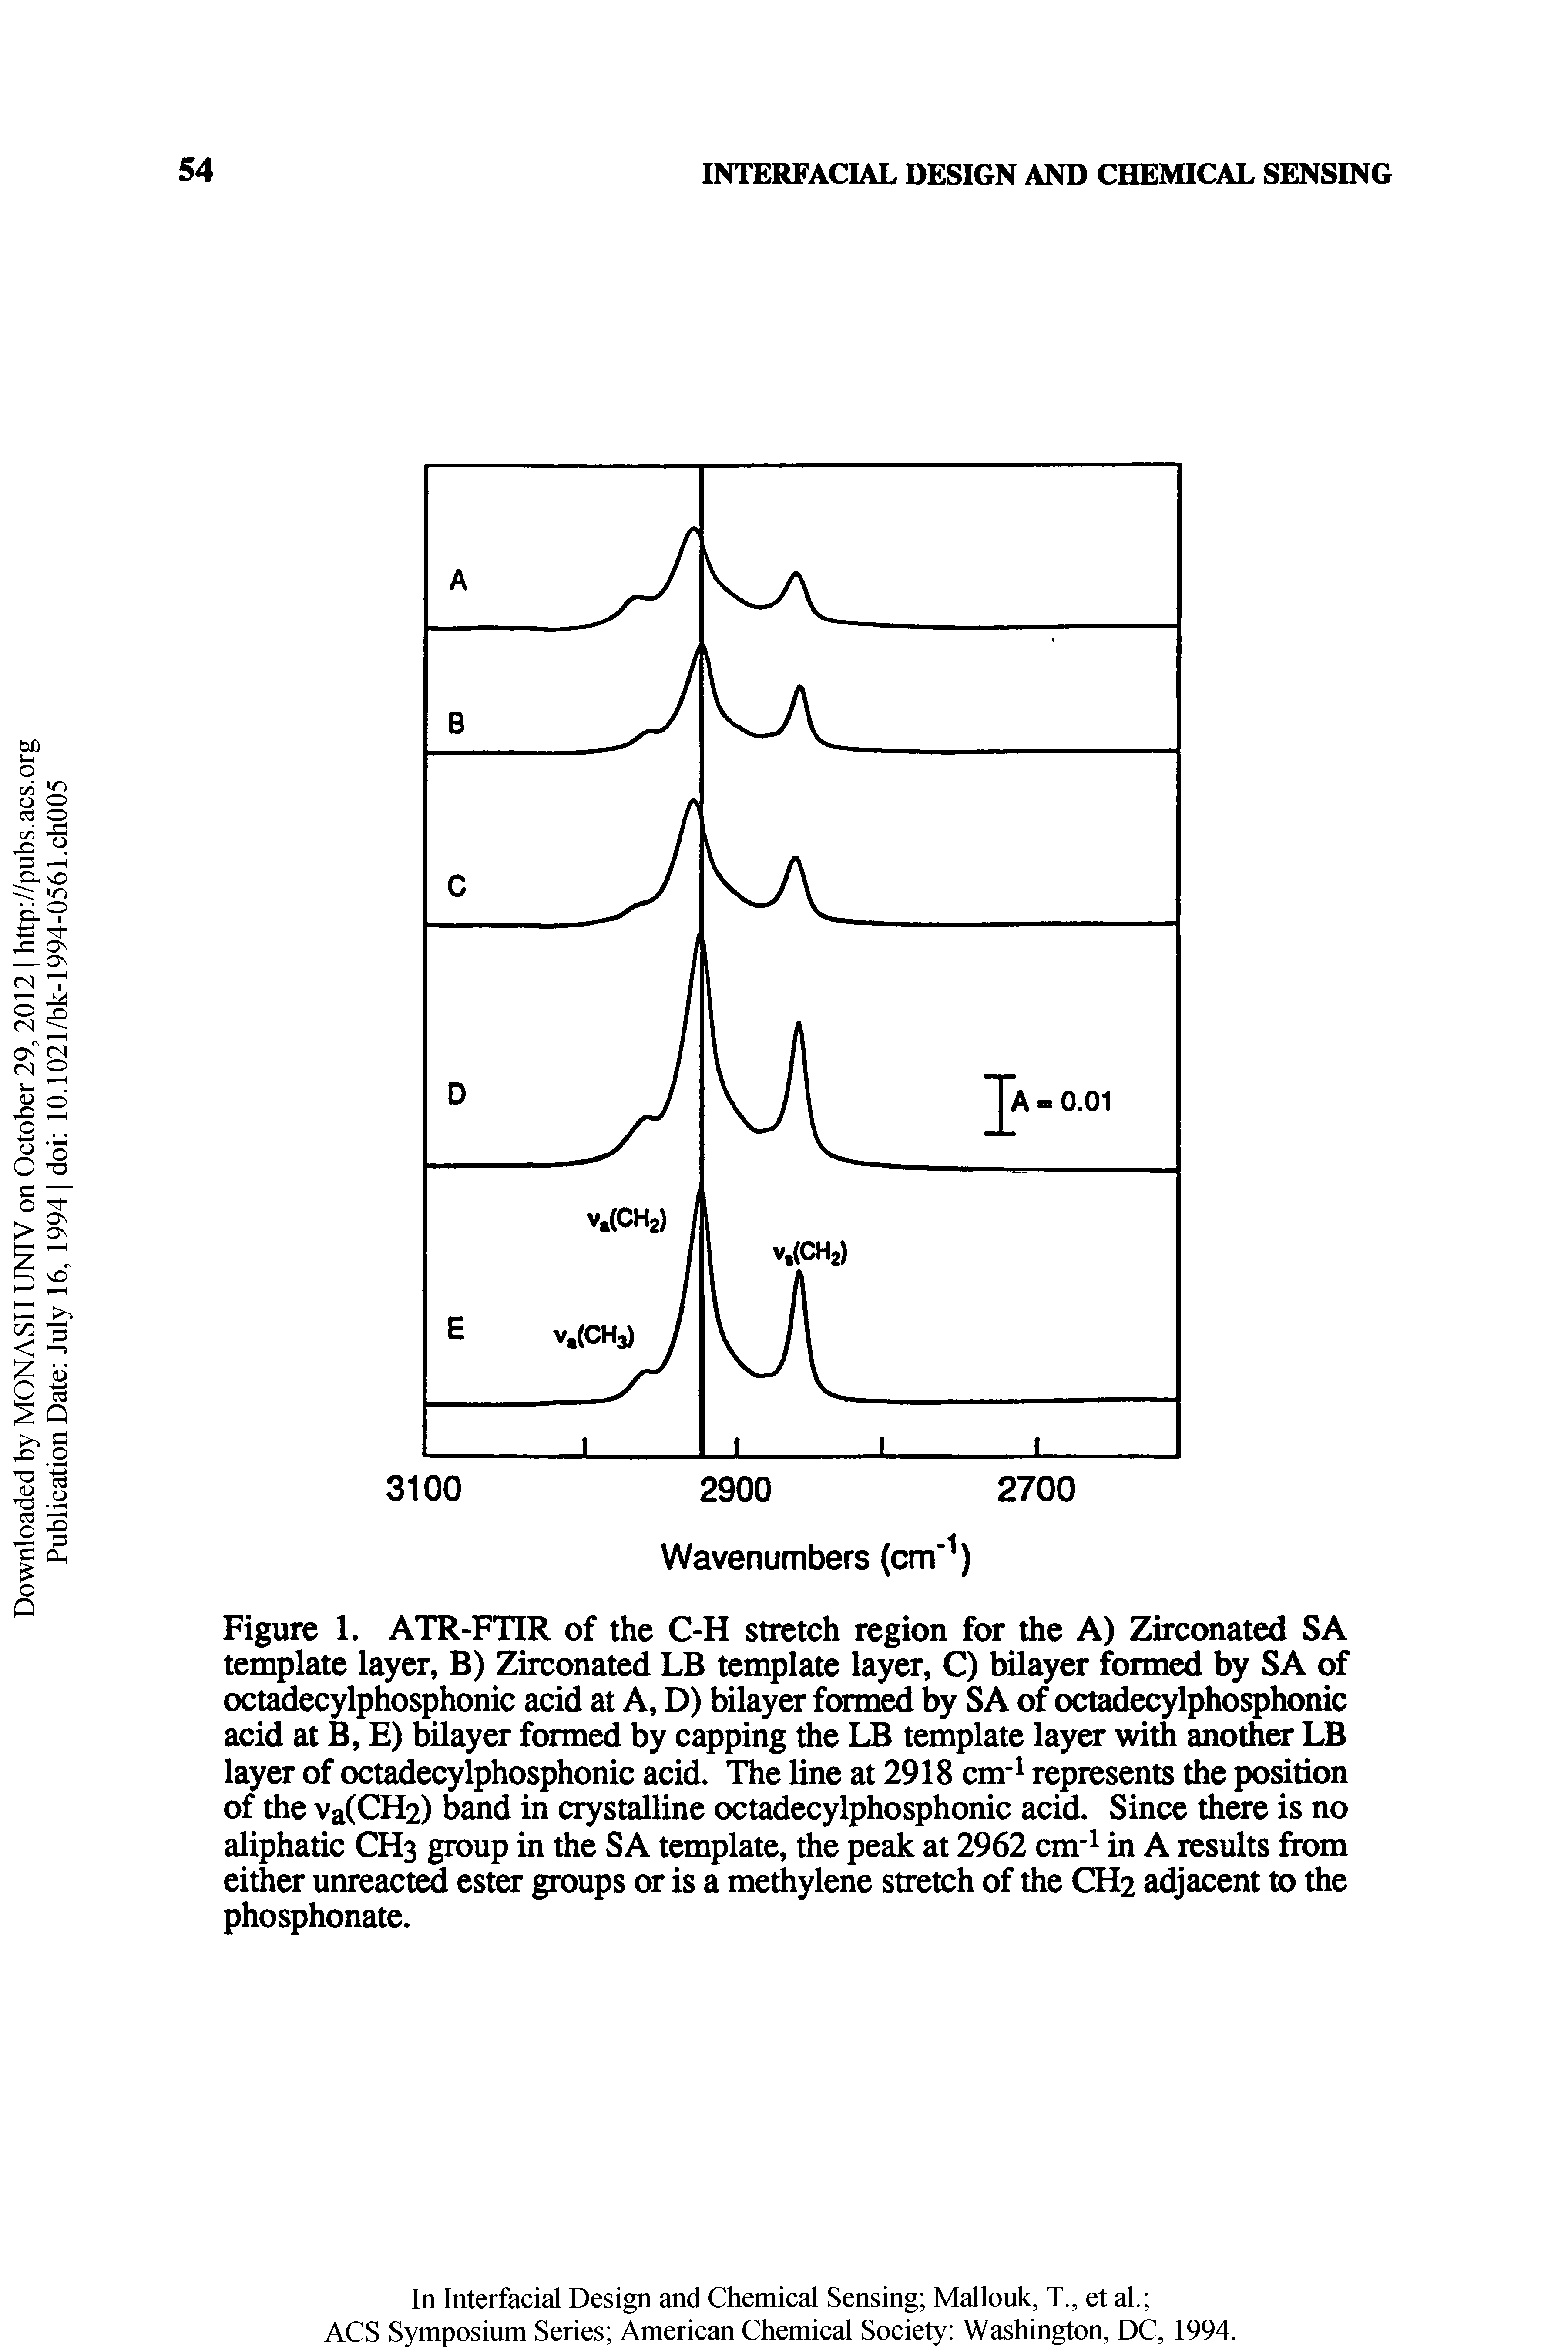 Figure 1. ATR-FTIR of the C-H stretch region for the A) Zirconated SA template layer, B) Zirconated LB template layer, C) bilayer formed by SA of octadecylphosphonic acid at A, D) bilayer formed by SA of octadecylphosphonic acid at B, E) bilayer formed by capping the LB template layer with another LB layer of octadecylphosphonic acid. The line at 2918 cwr represents the position of the va(CH2) band in crystalline octadecylphosphonic acid. Since there is no aliphatic CH3 group in the SA template, the peak at 2962 cmr in A results from either unreact ester groups or is a methylene stretch of the CH2 adjacent to the phosphonate.